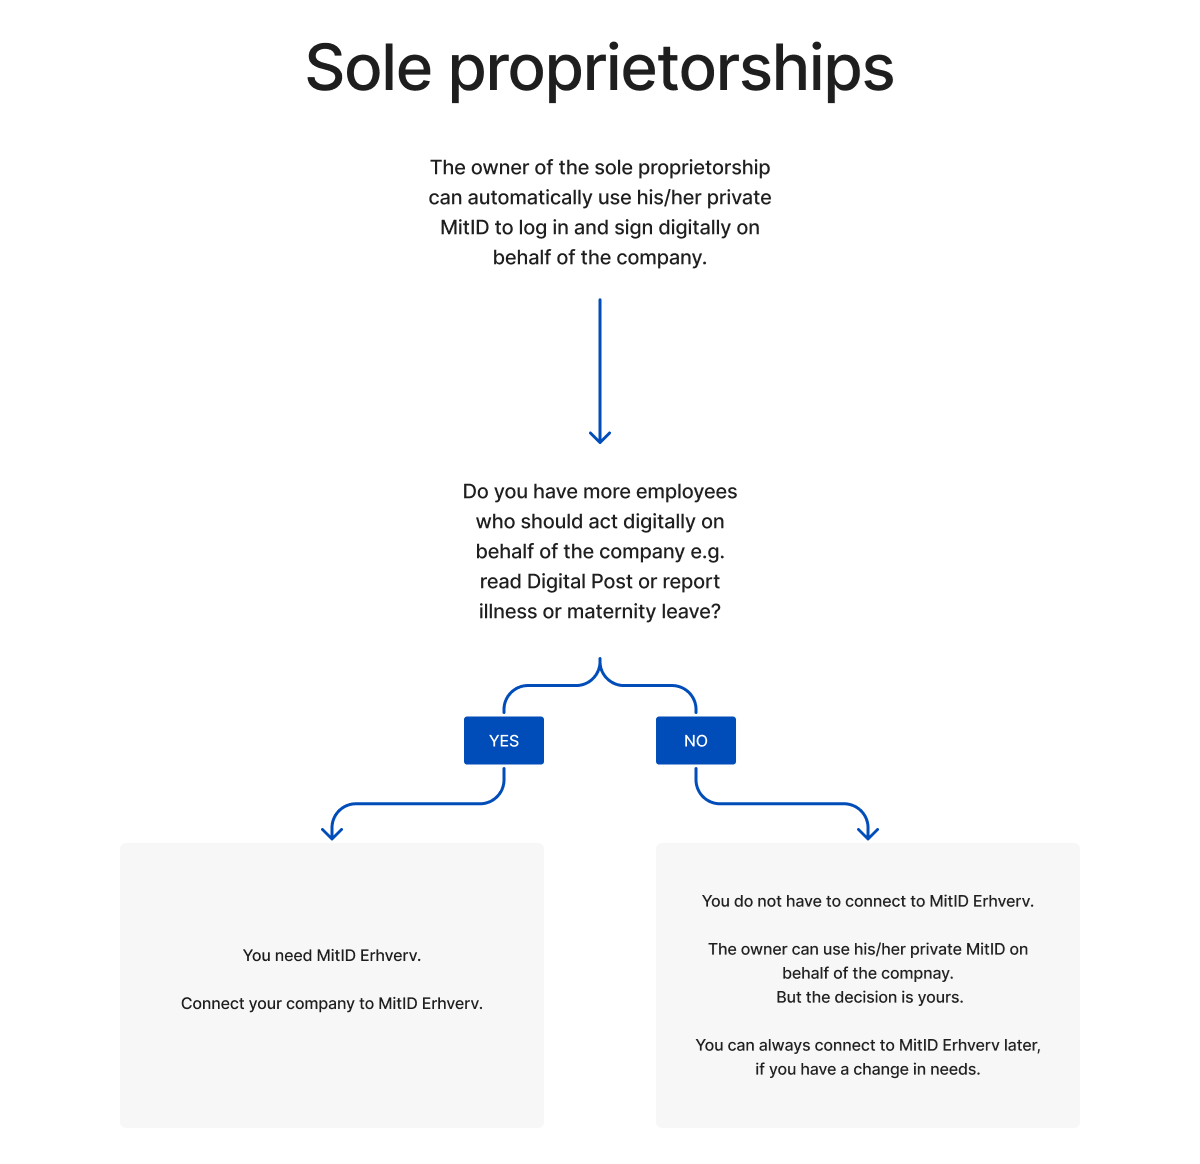 Sole proprietorships. The vast majority does not need MItID Erhverv but the owner can use his/her private MitID.